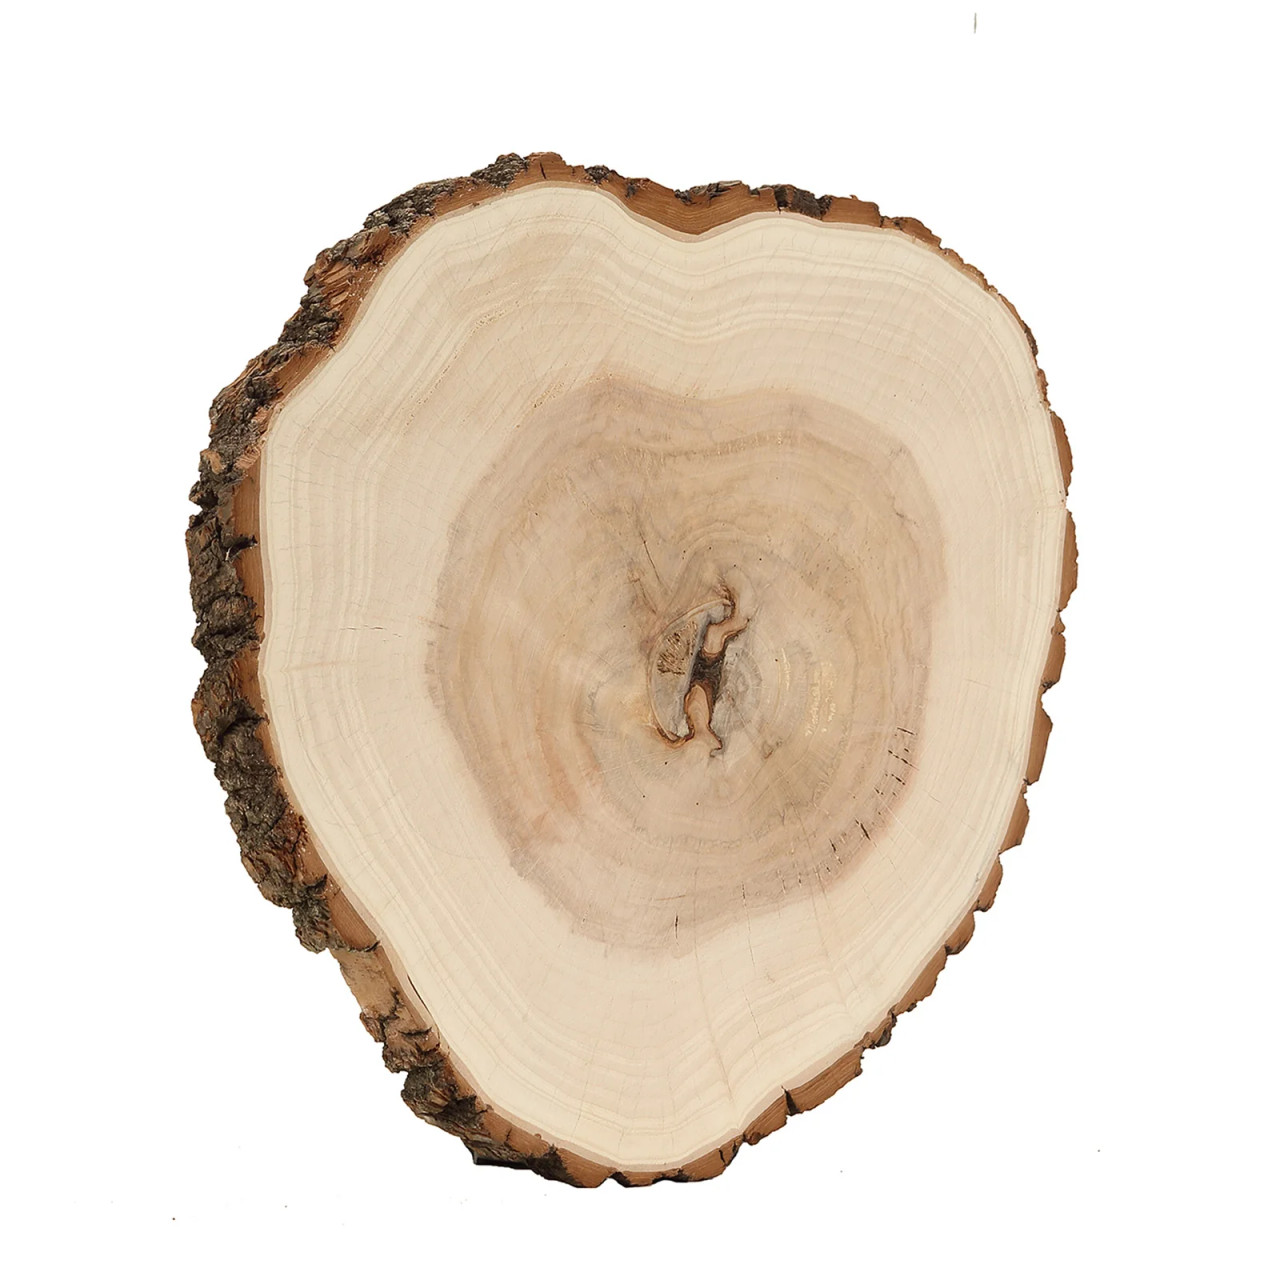 Case of 12 Extra Large Rustic Natural Wood Slices, Round Poplar